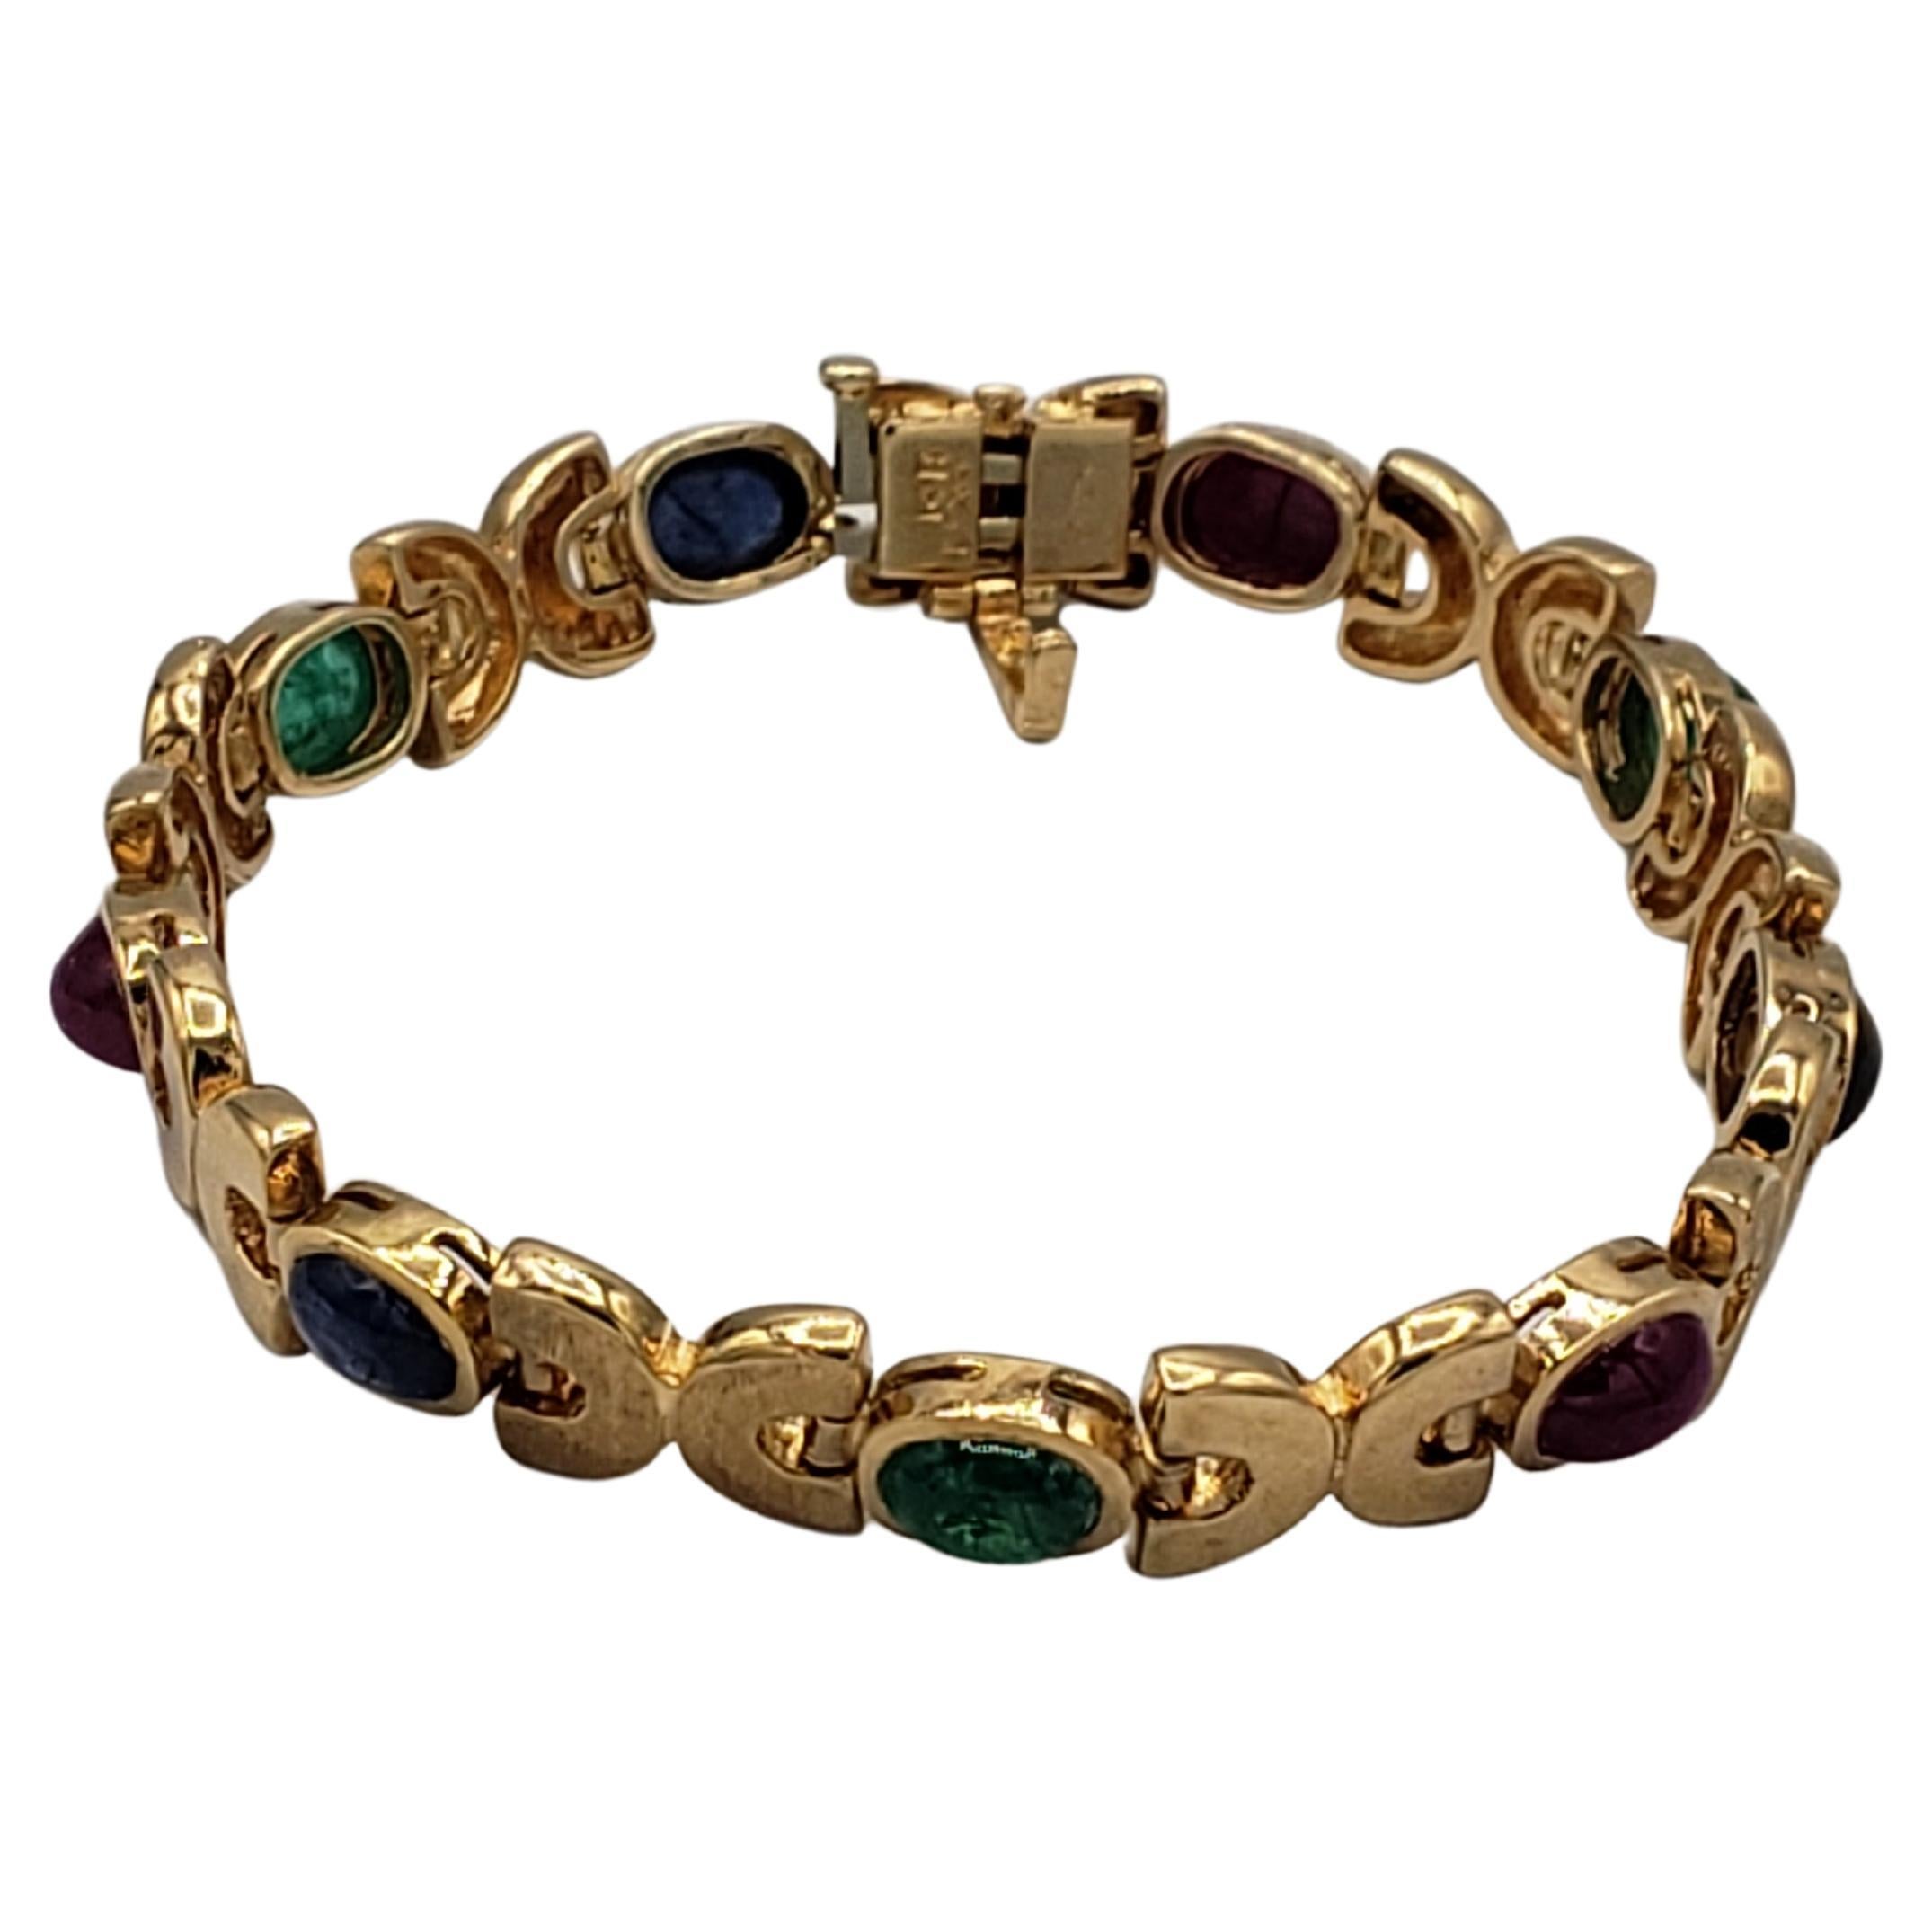 This exquisite bracelet by LaFrancee is a true treasure for any jewelry collection. Crafted from 14k solid yellow gold and adorned with stunning natural ruby, sapphire, and emerald gemstones, this Byzantine style piece radiates elegance and